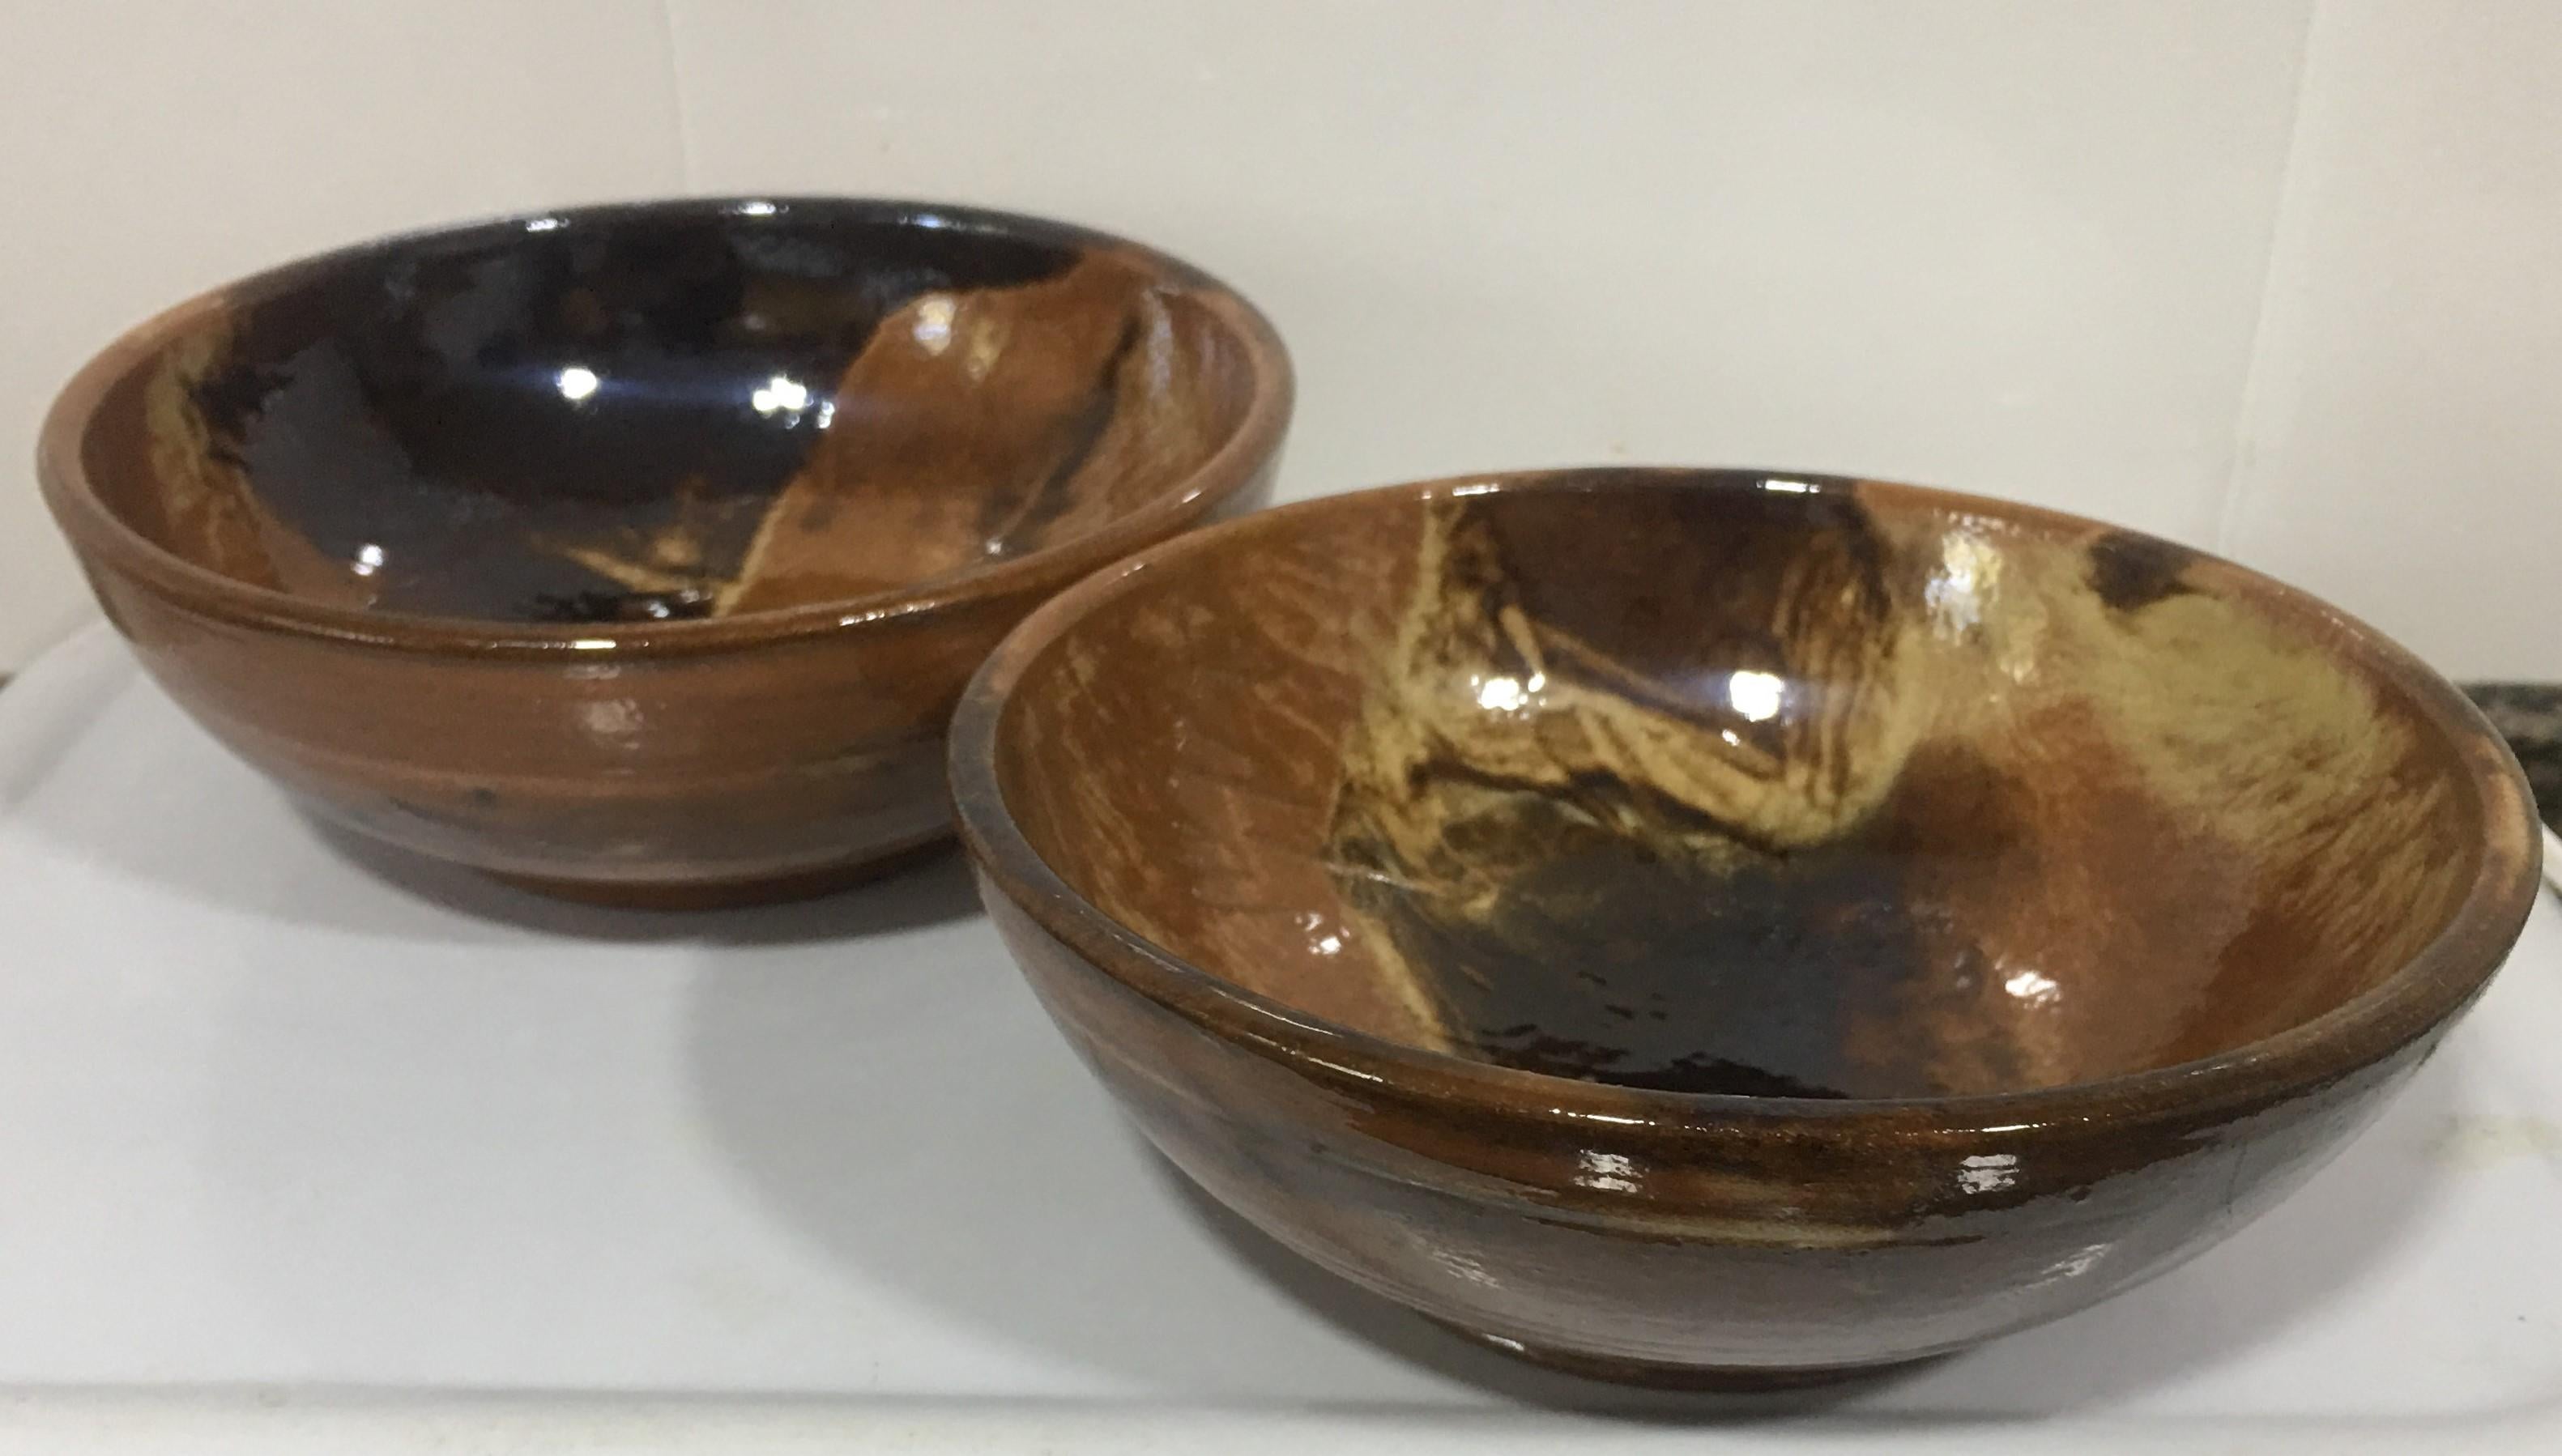 This glazed Valencia Spanish bowl is a great addition to any collector of Spanish artifacts. It's from the mid-1940. It has brown and black fired